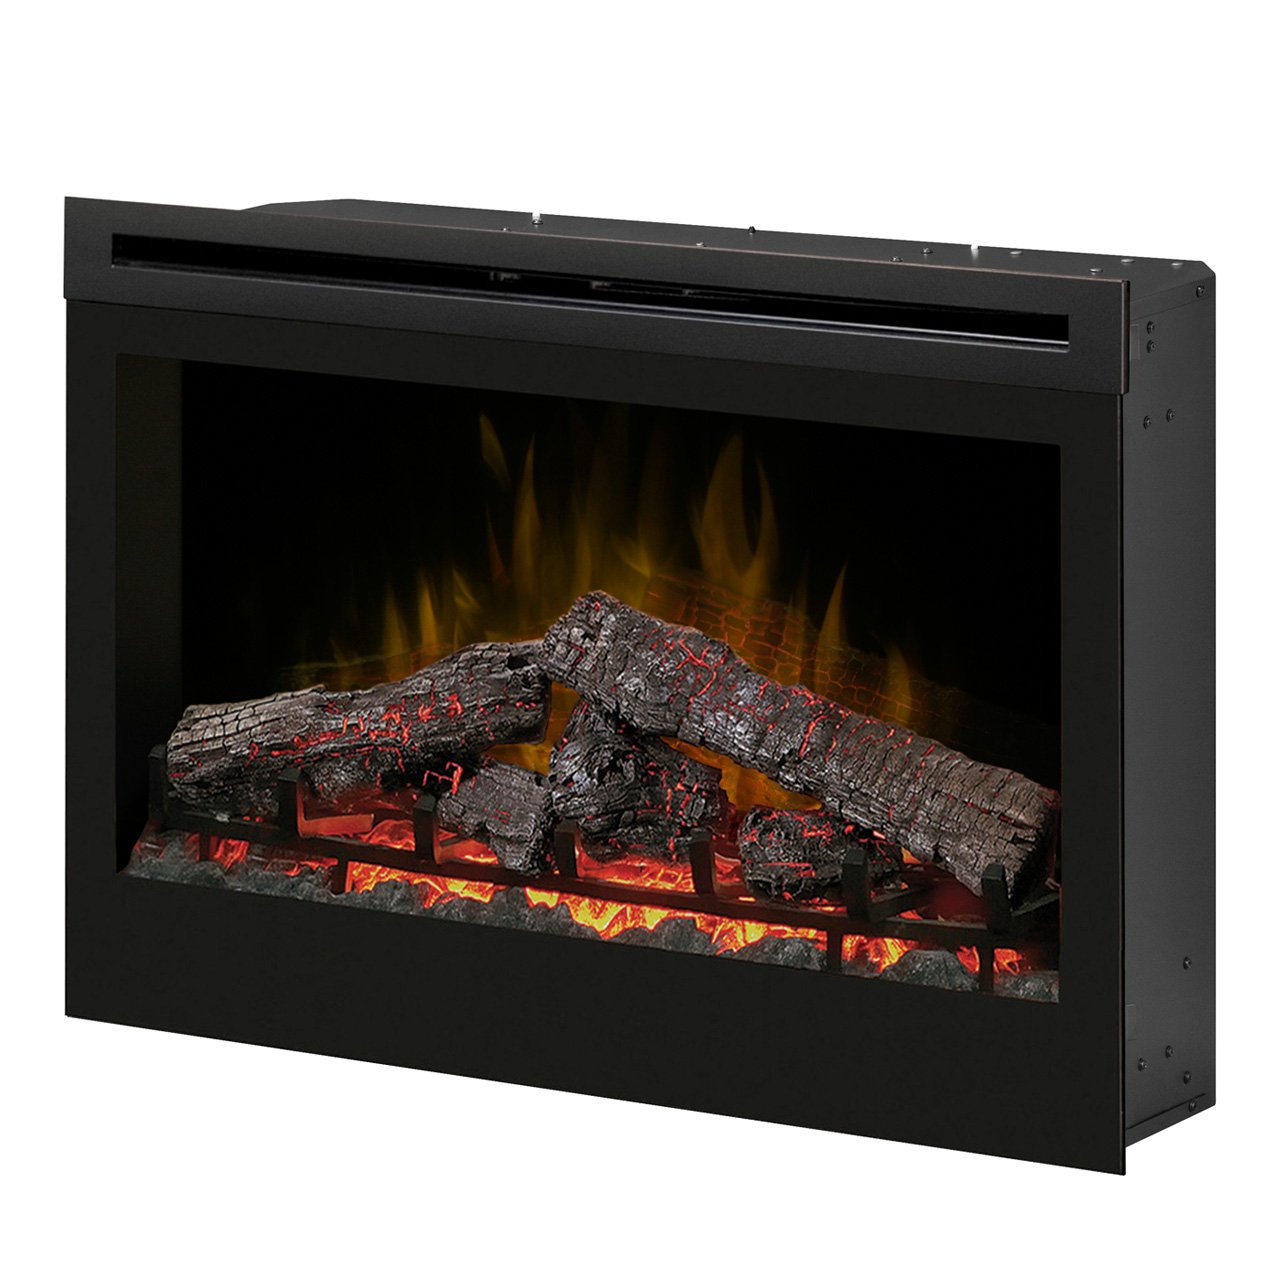 Gas Fireplace Unit Awesome Dimplex Df3033st 33 Inch Self Trimming Electric Fireplace Insert